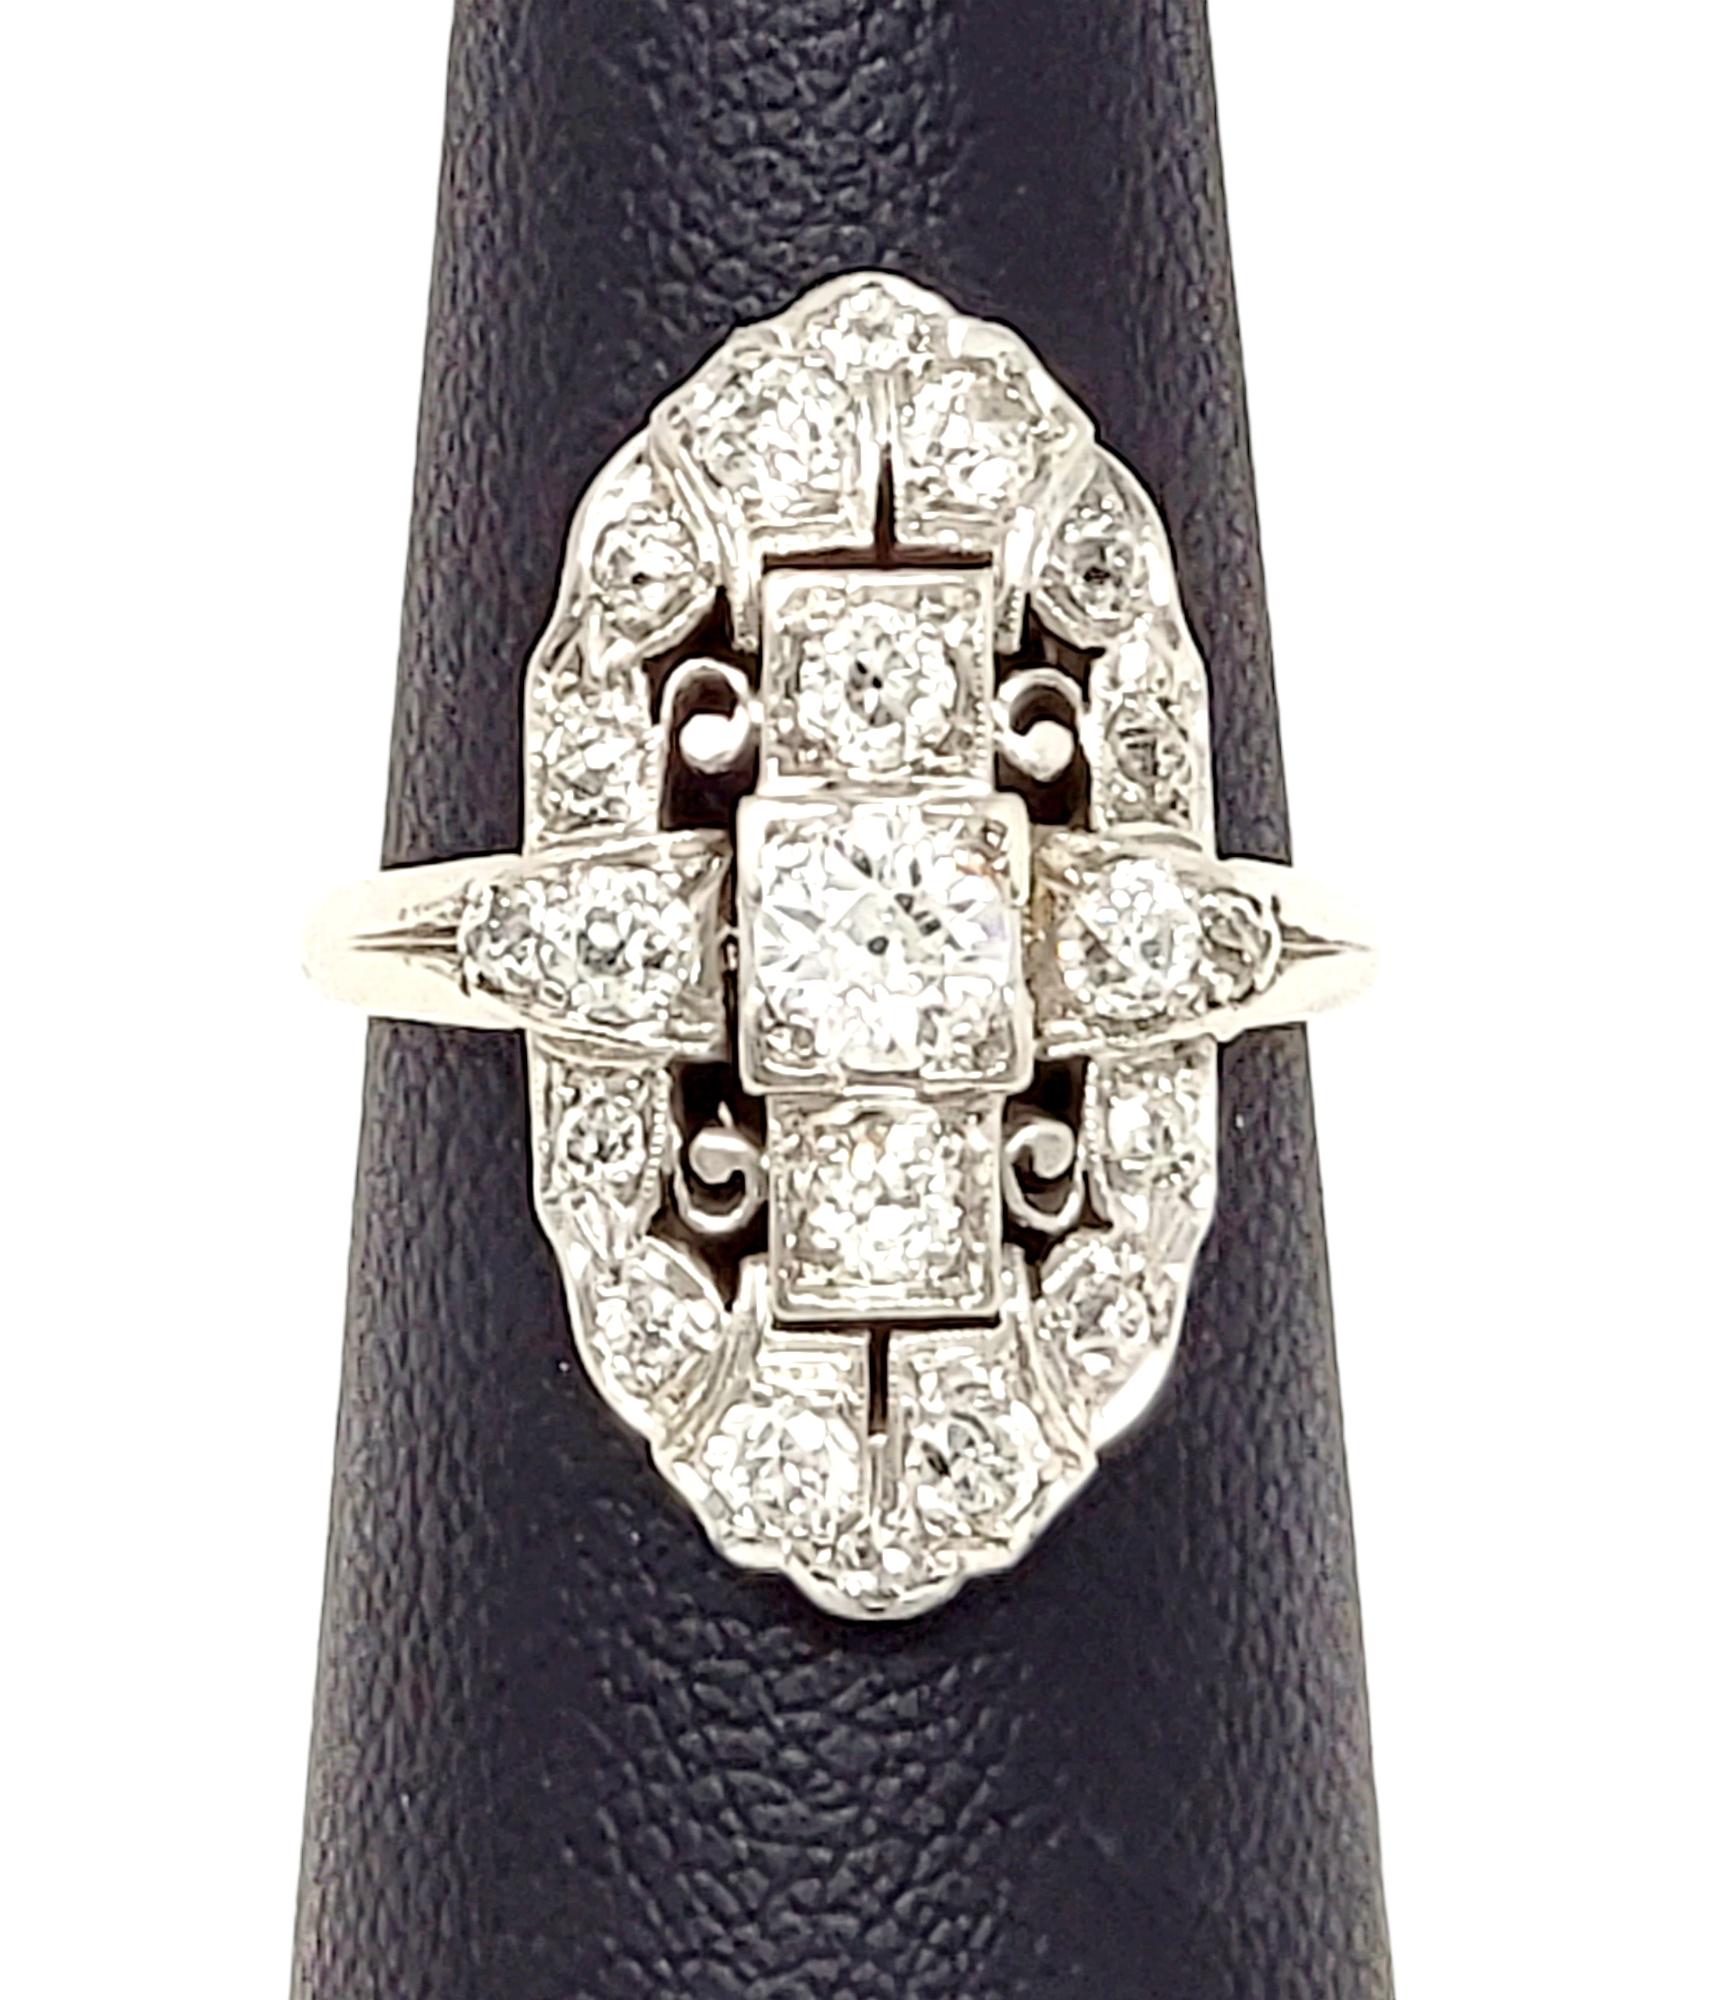 Vintage Old European Cut Diamond Navette Ring in Palladium 1.75 Carats Total For Sale 3